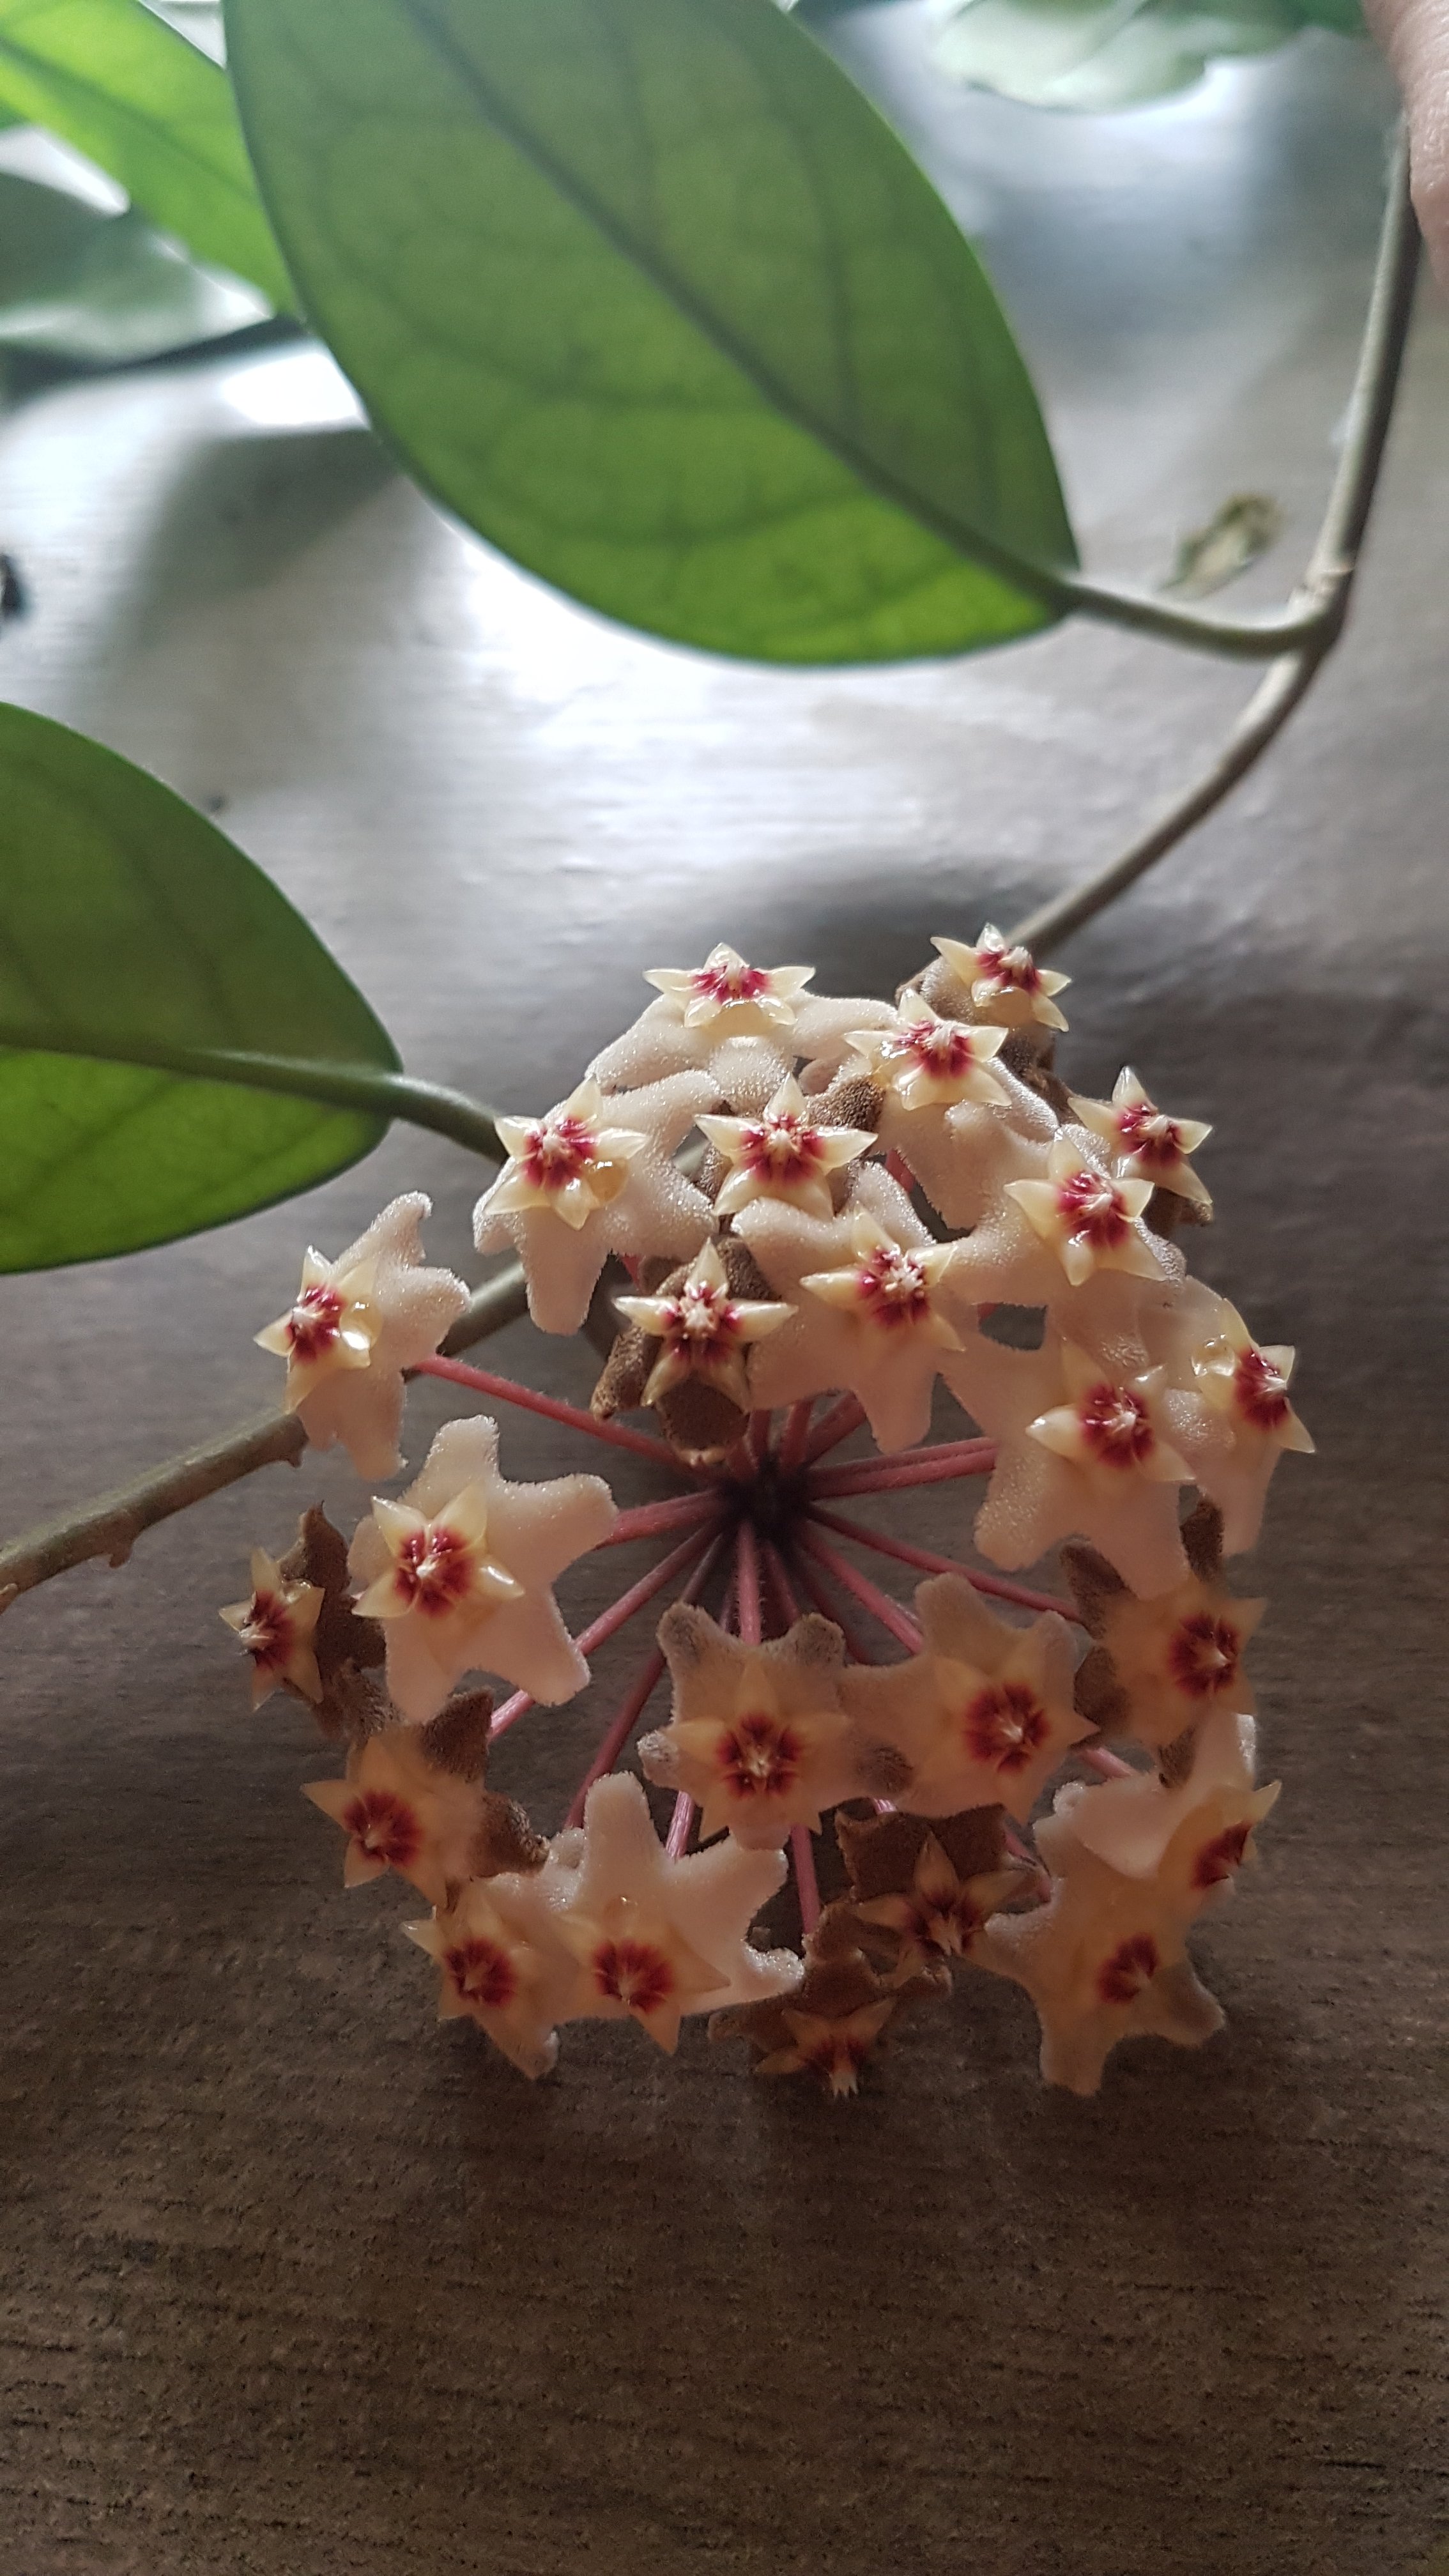 This Hoya has had this flower for 3 weeks so it is starting to dry up but is still pretty!